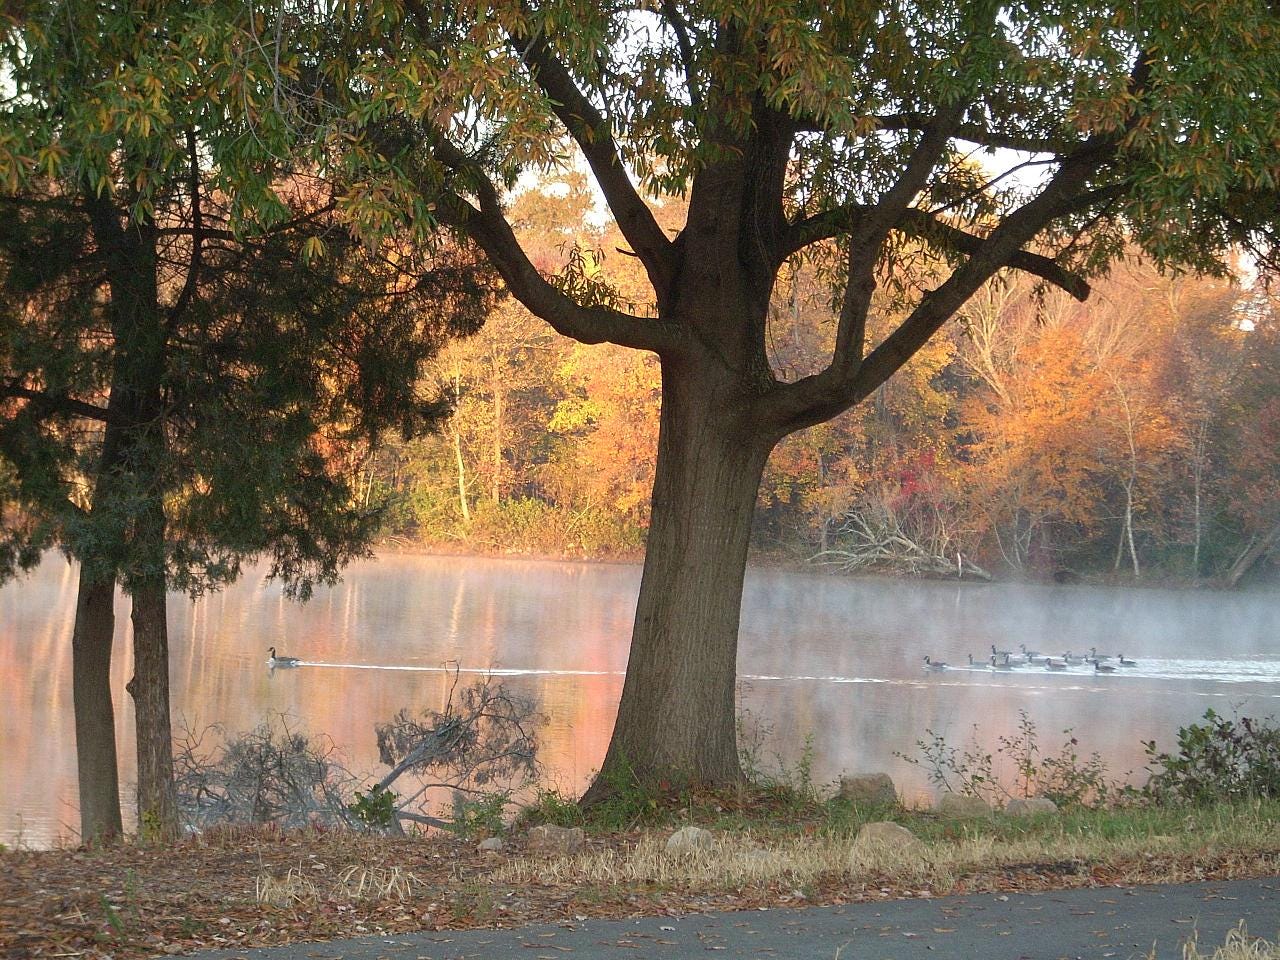 Photo of a flock of geese in a pond surrounded by trees with yellow and orange fall leaves in the background, with a lone goose way out in front of the flock